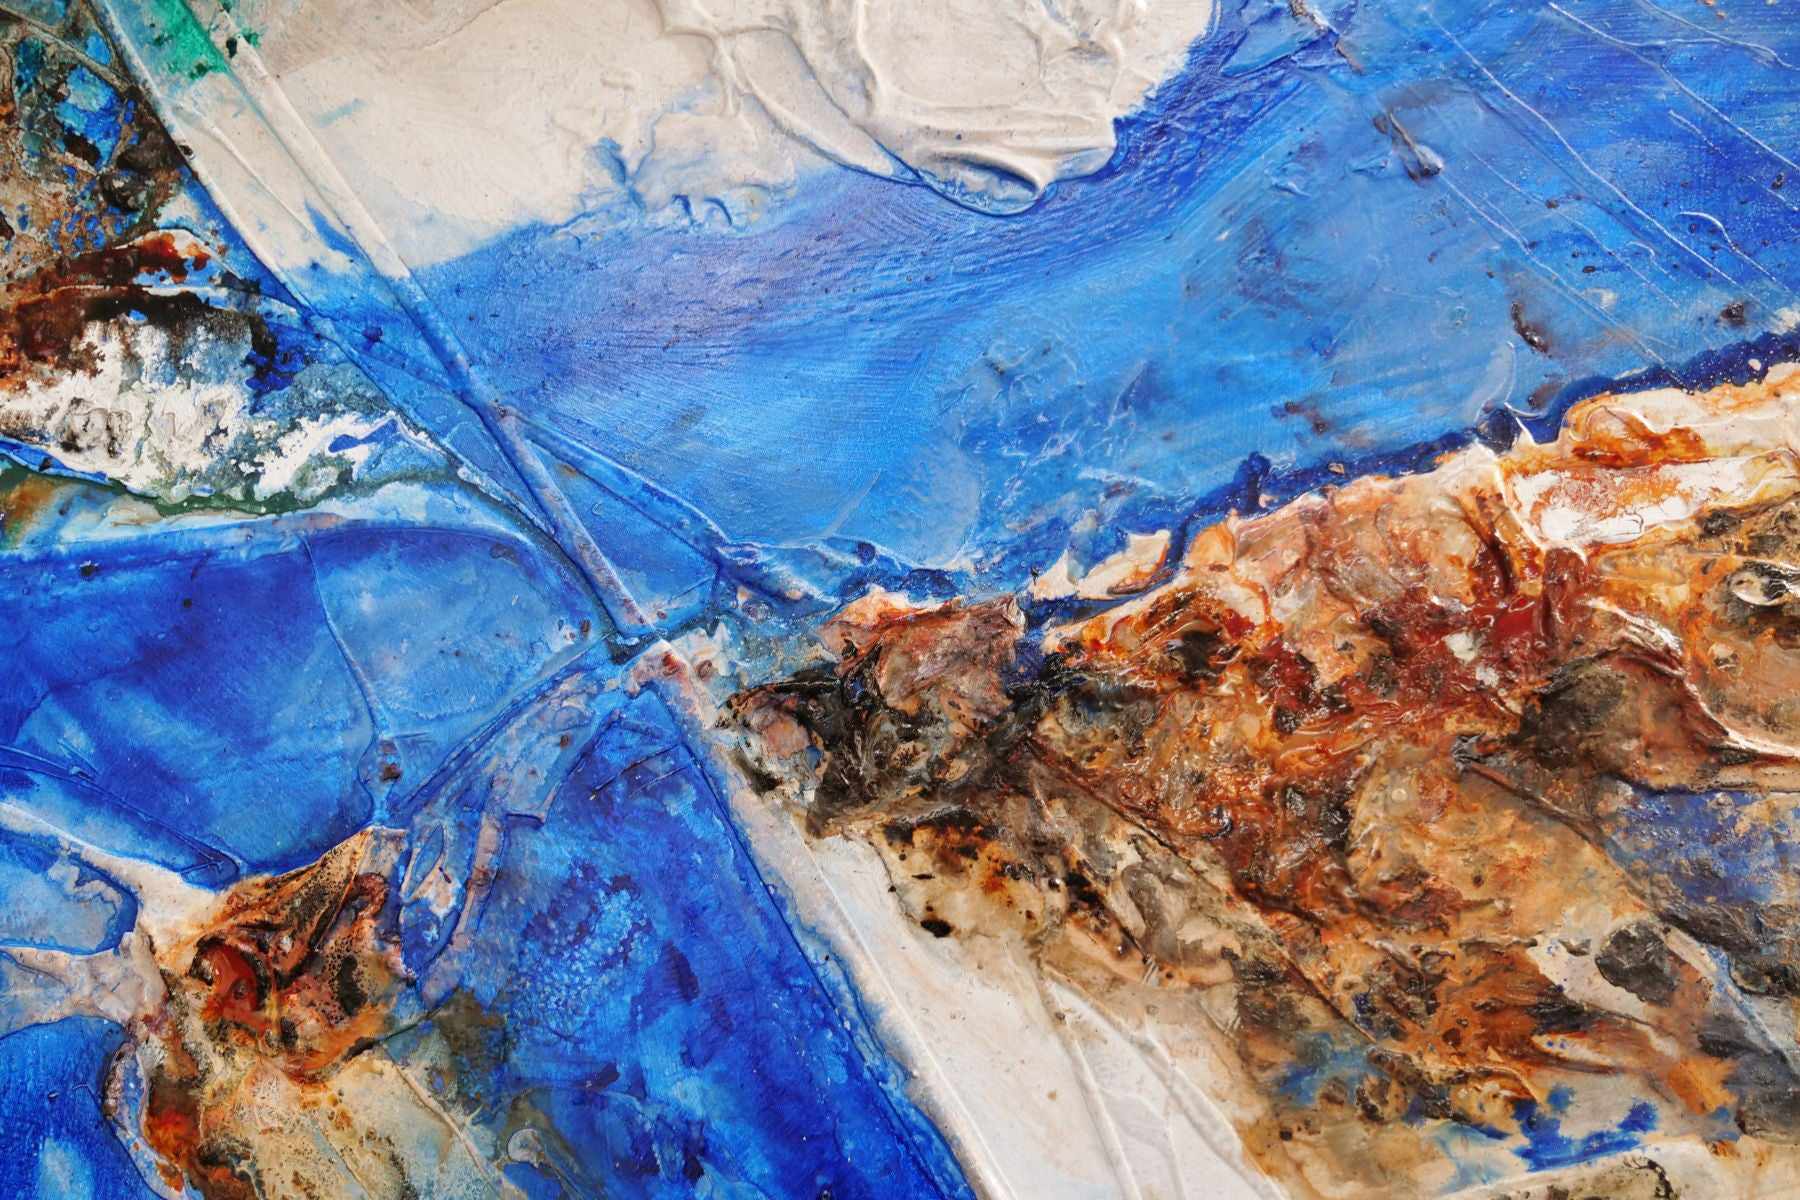 Outback Blue 240cm x 100cm Blue Cream Textured Abstract Painting (SOLD)